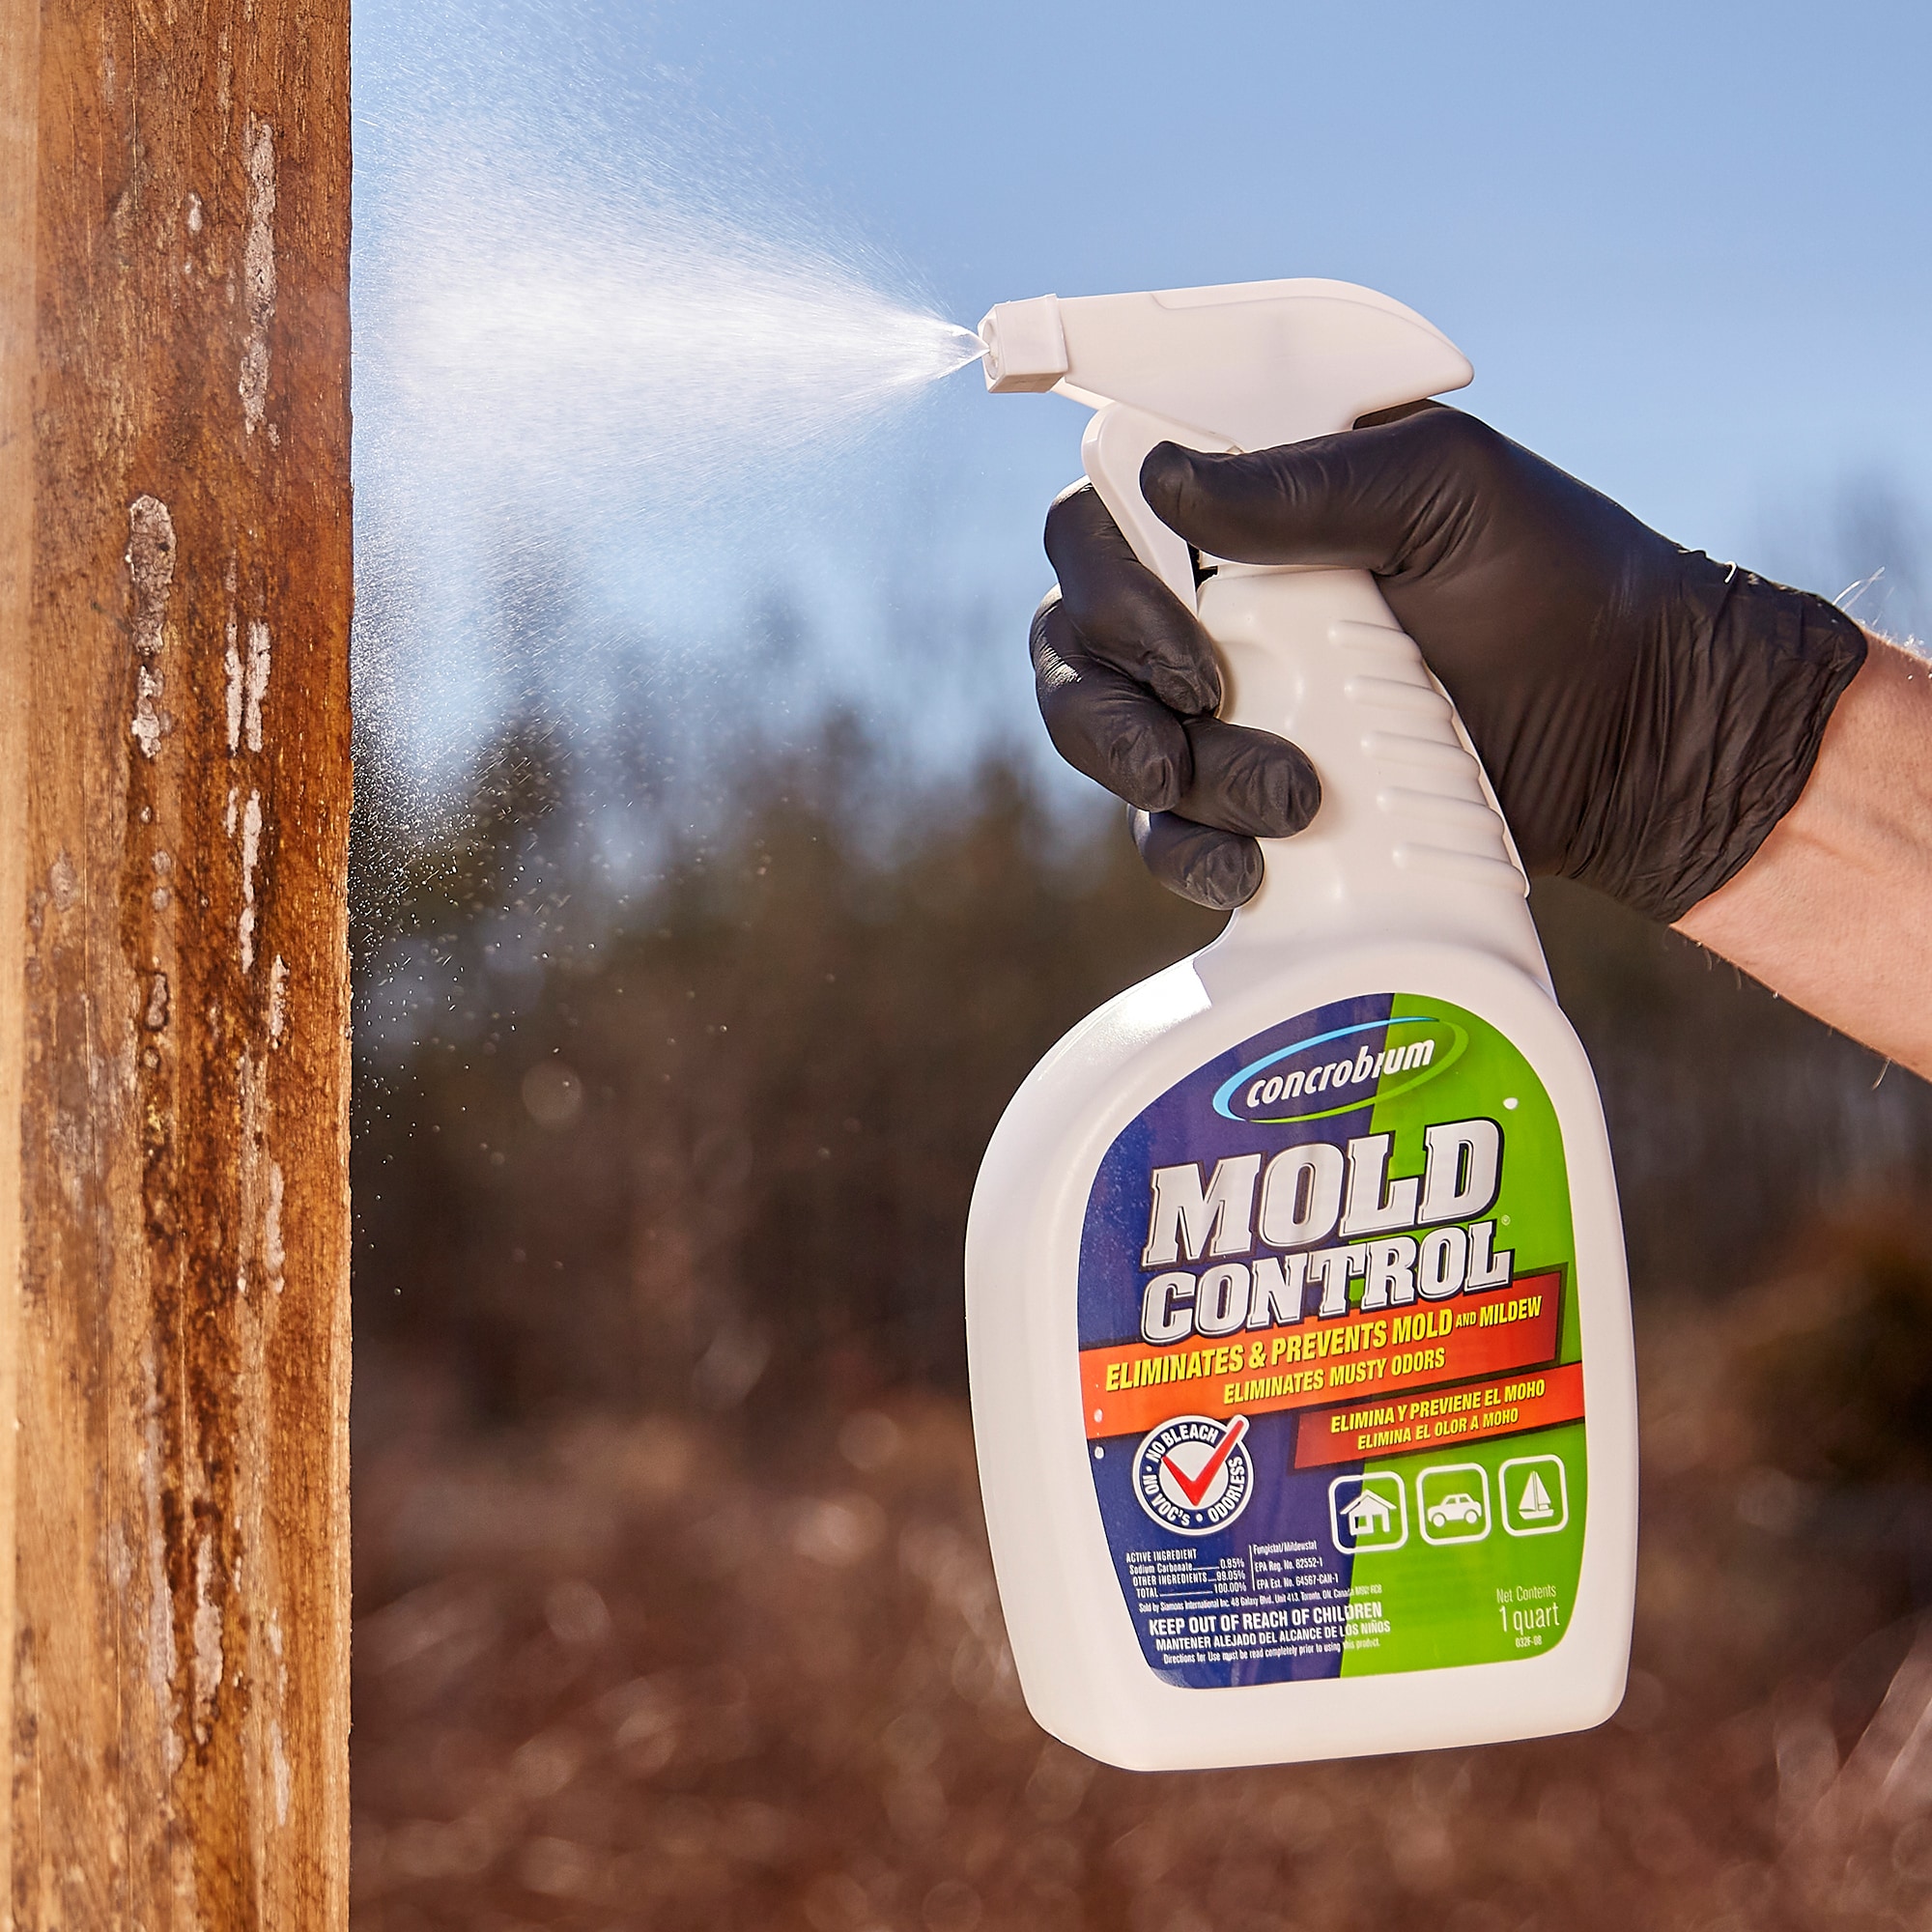 Mold Control online